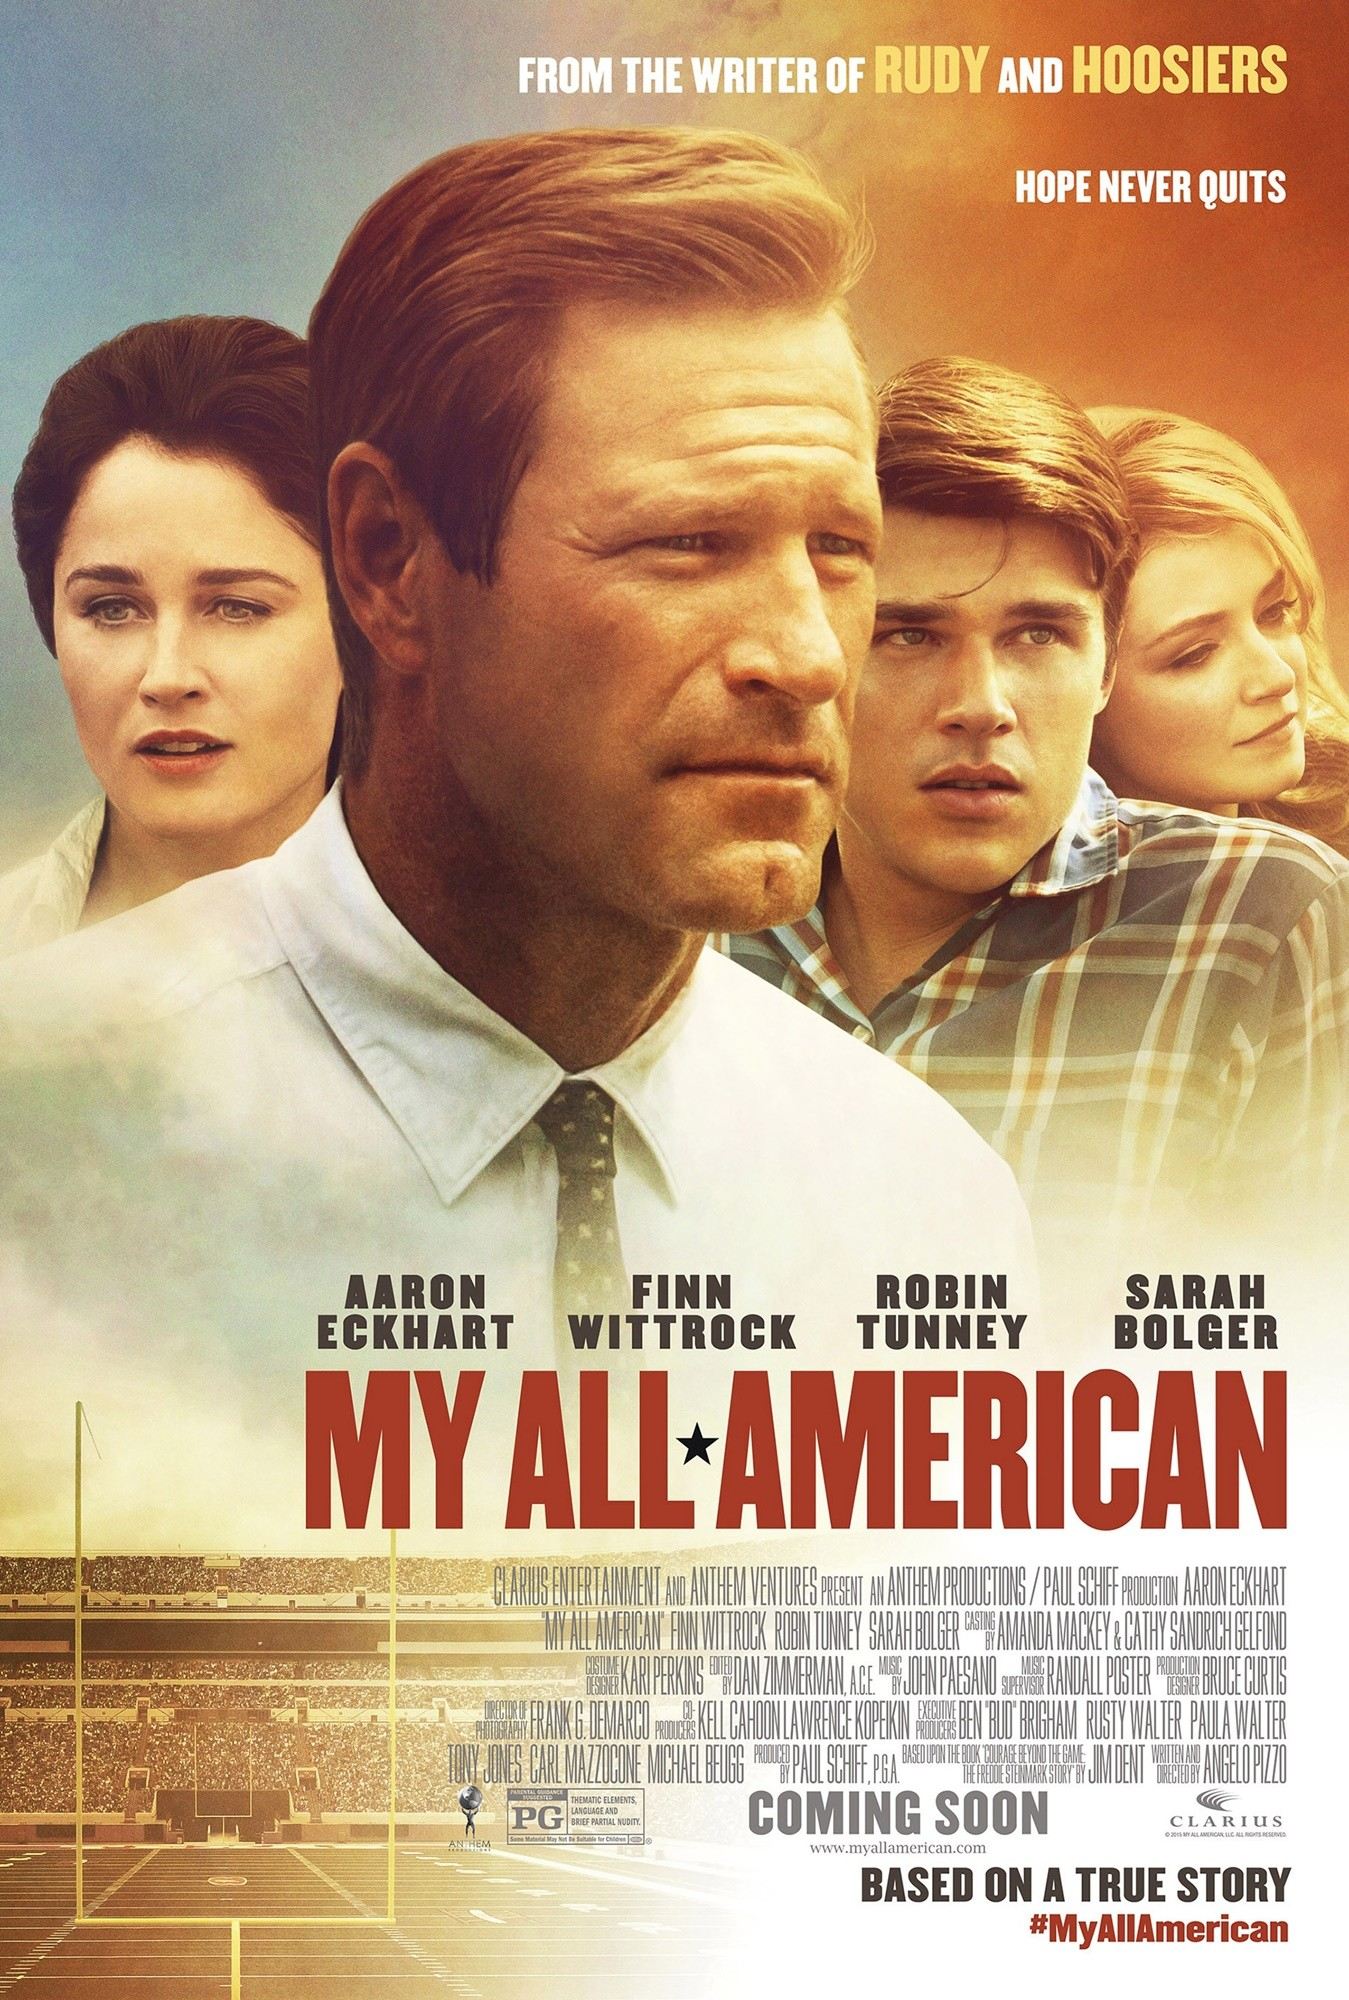 Poster of Clarius Entertainment's My All American (2015)